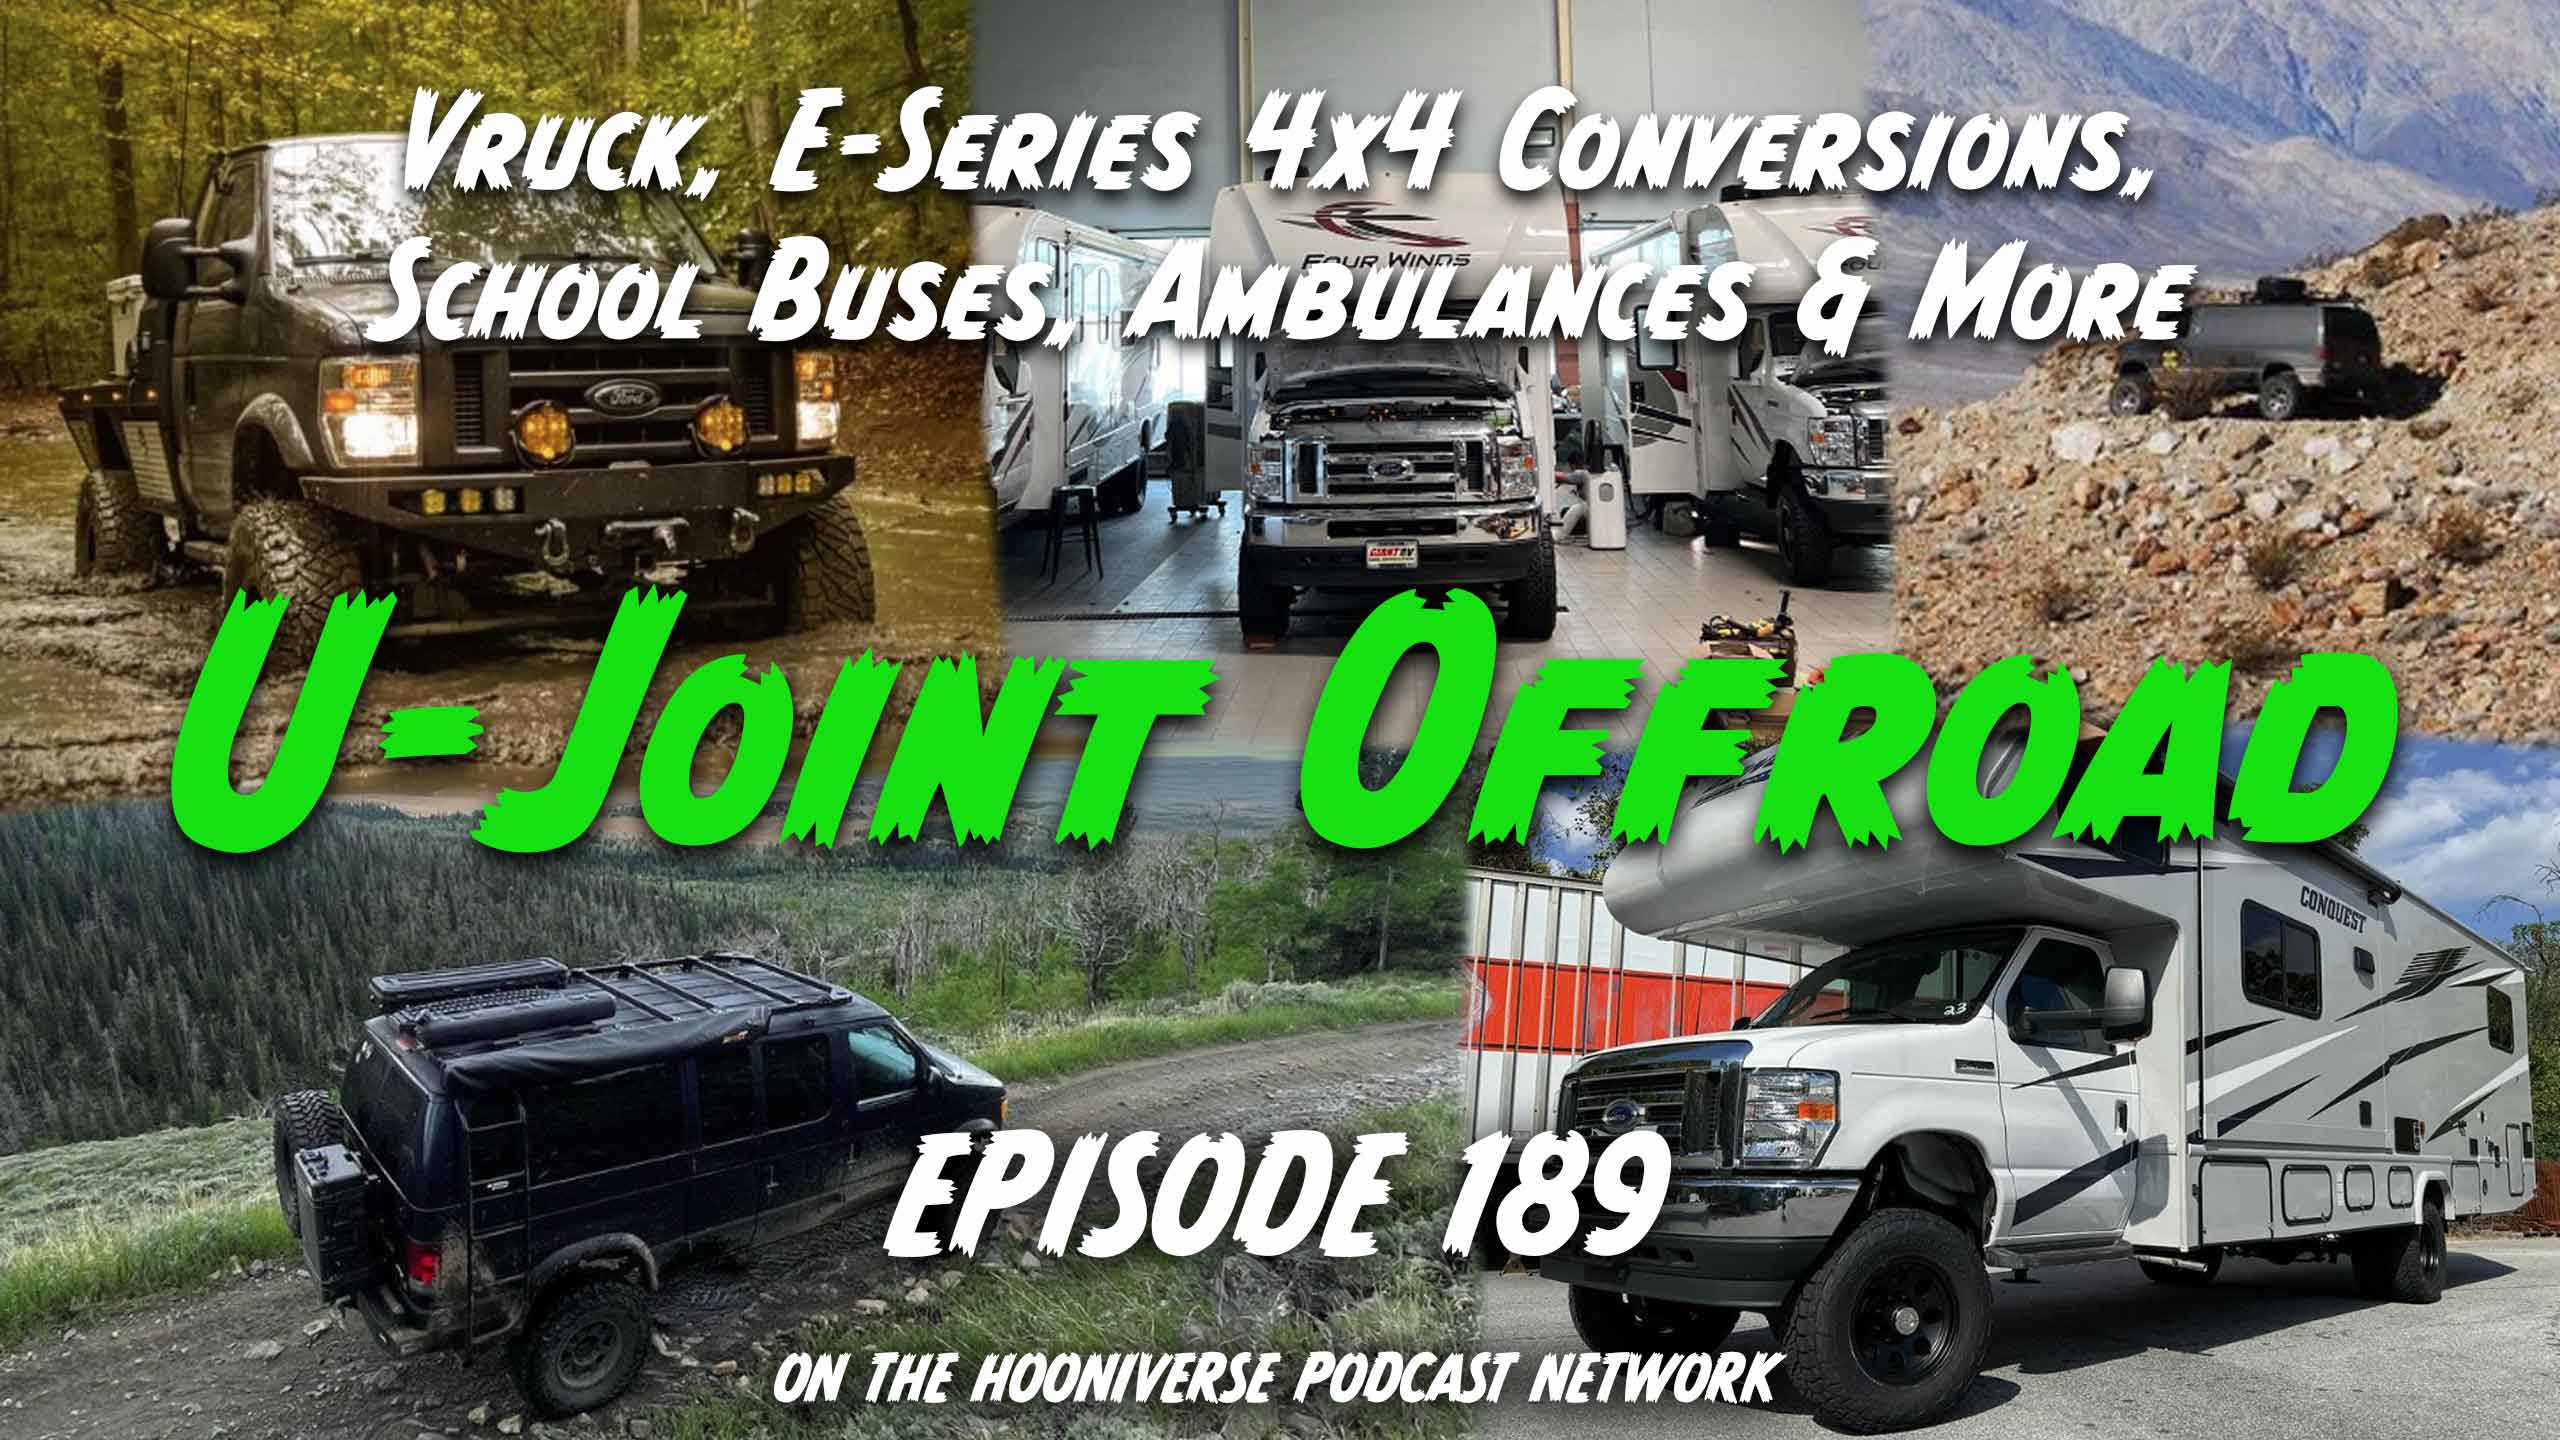 Chris-Steuber-UJoint-Offroad-Vruck-E-Series-4x4-Off-The-Road-Again-Episode-189